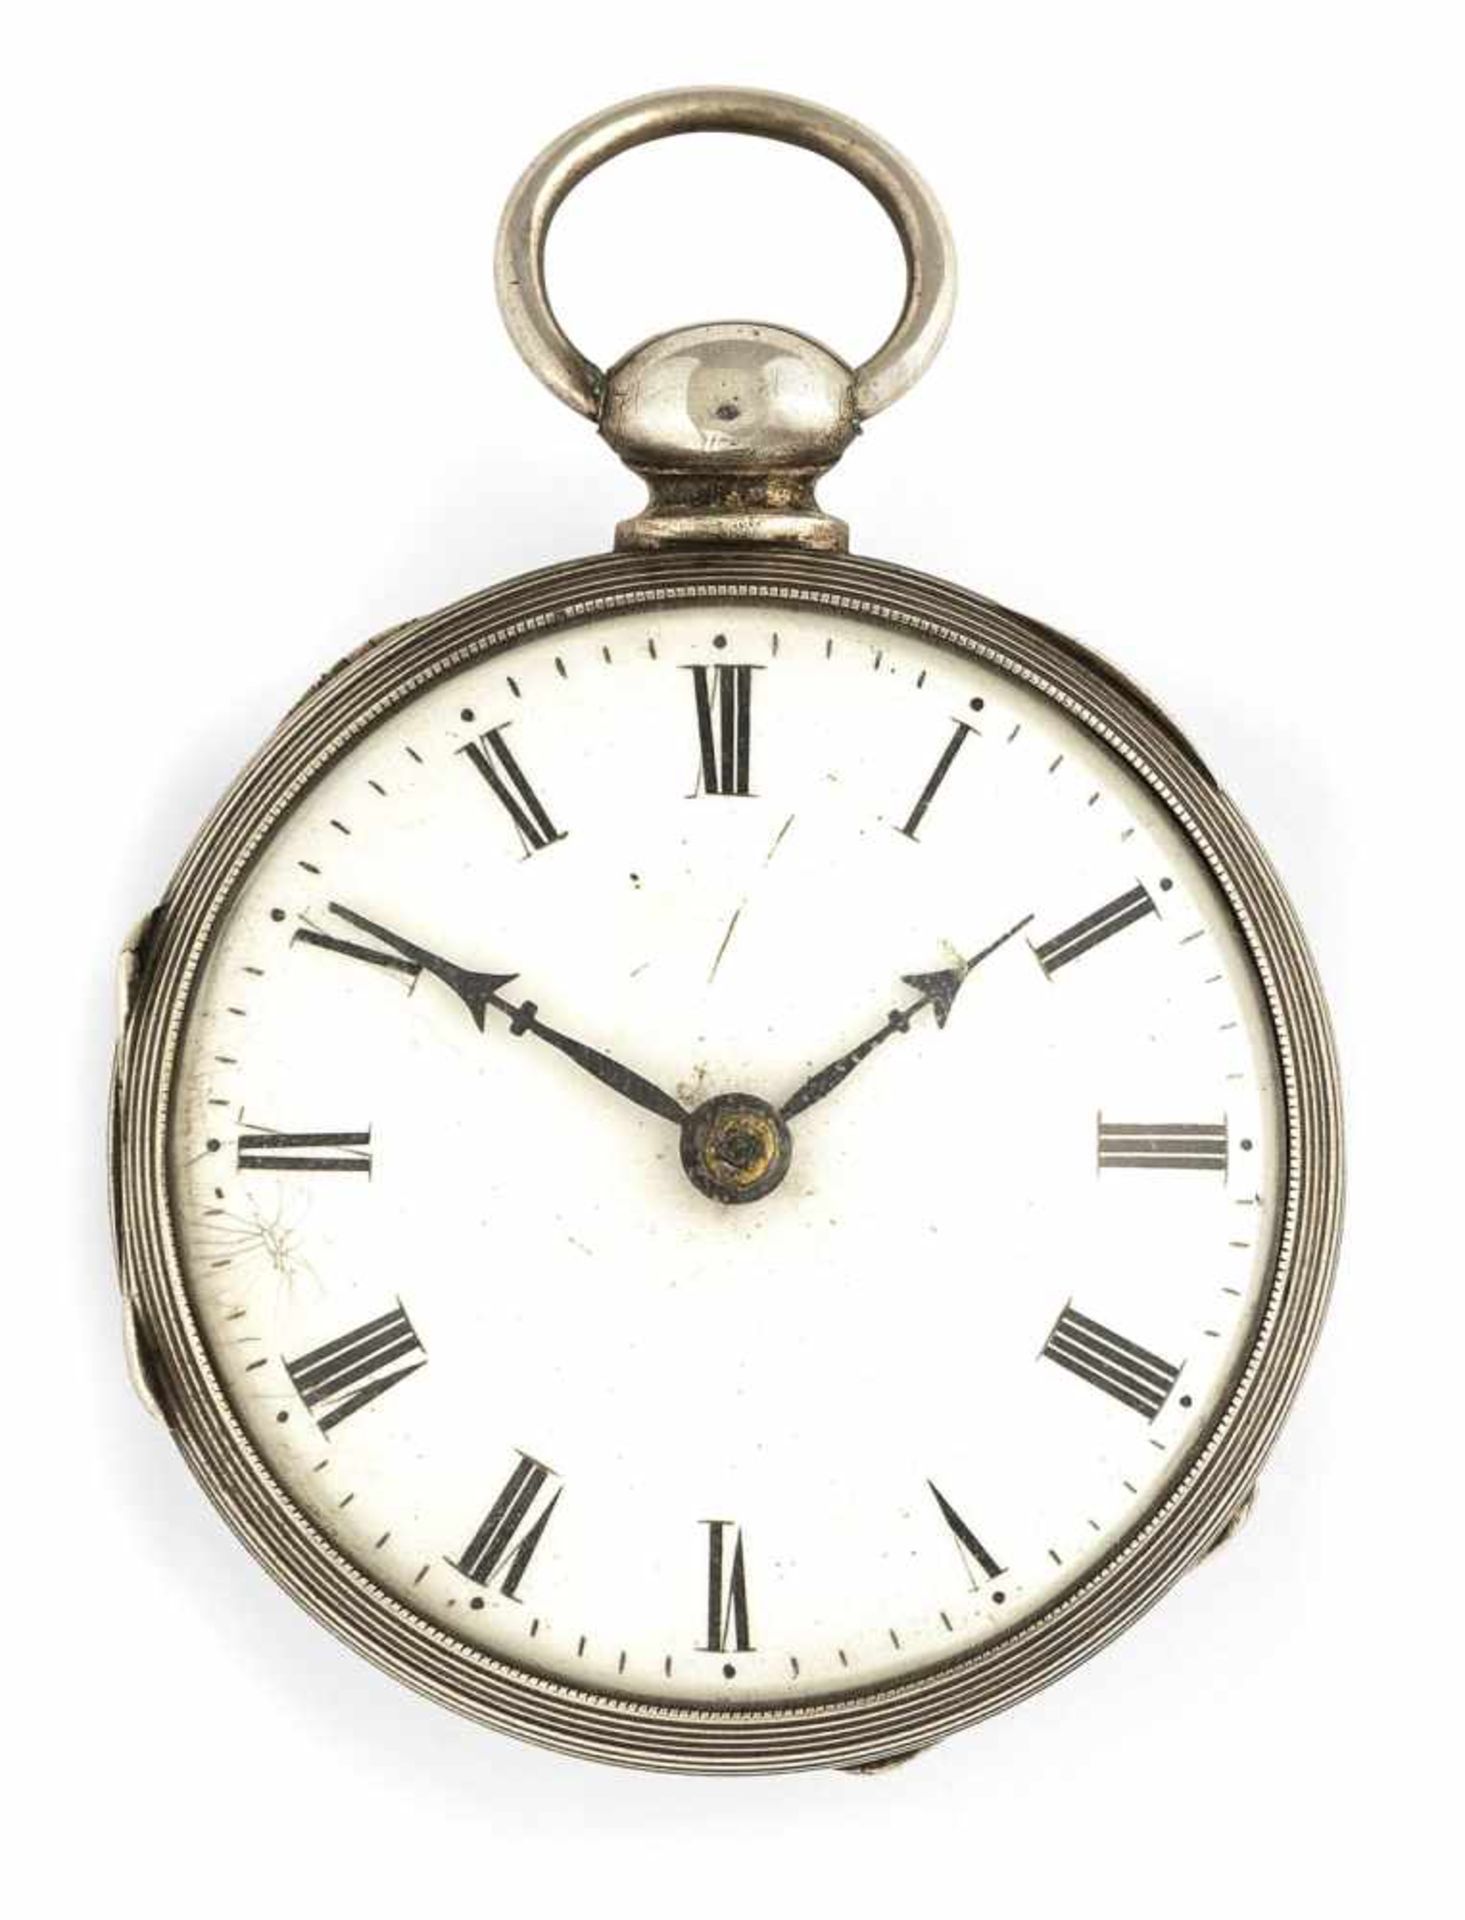 A silver pocket watch, c. 1800. White enamel dial with Roman numerals. Rest. Add. Signs of use and